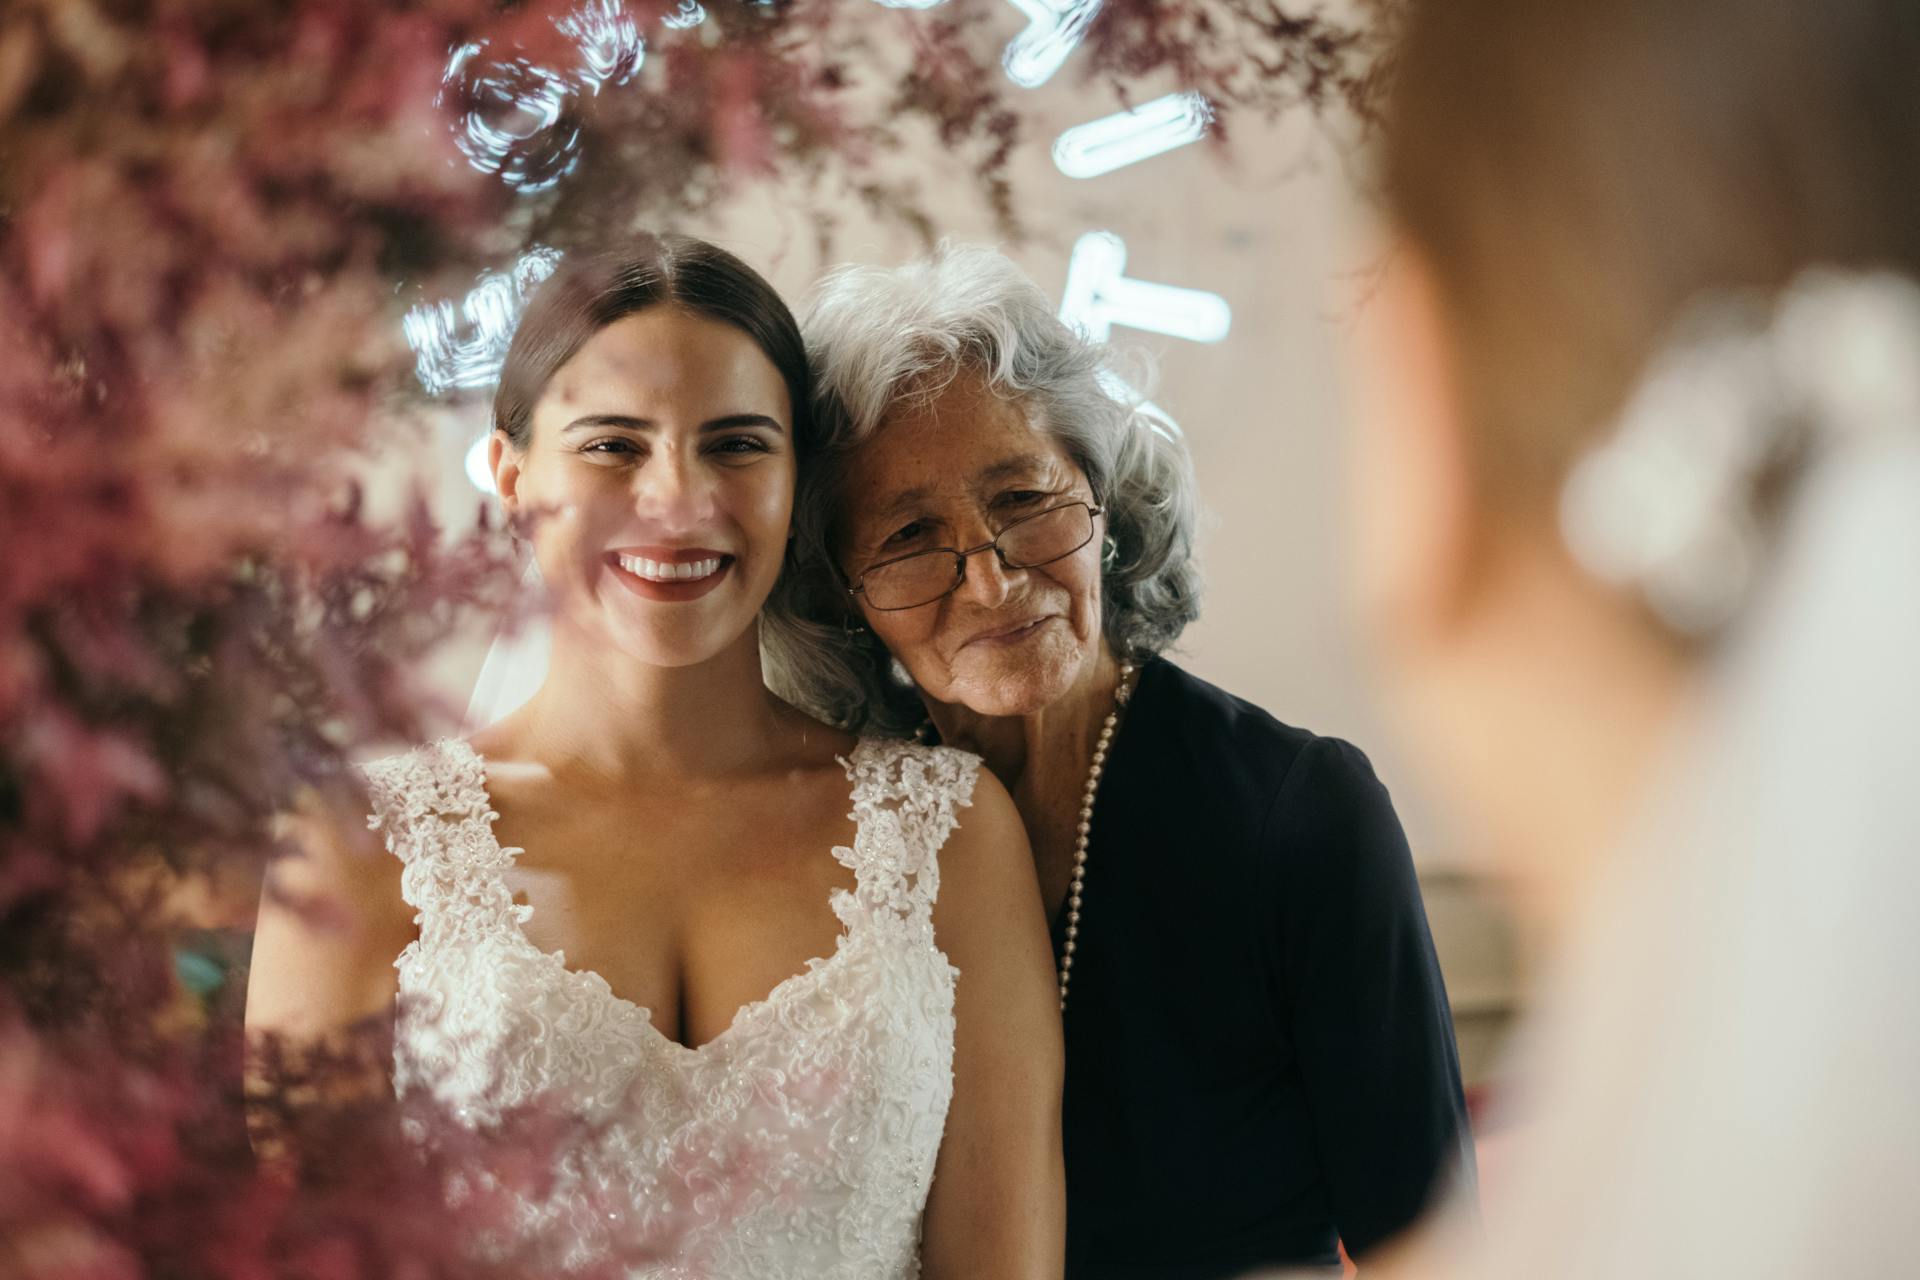 A bride and her grandmother looking in a mirror and smiling | Source: Pexels